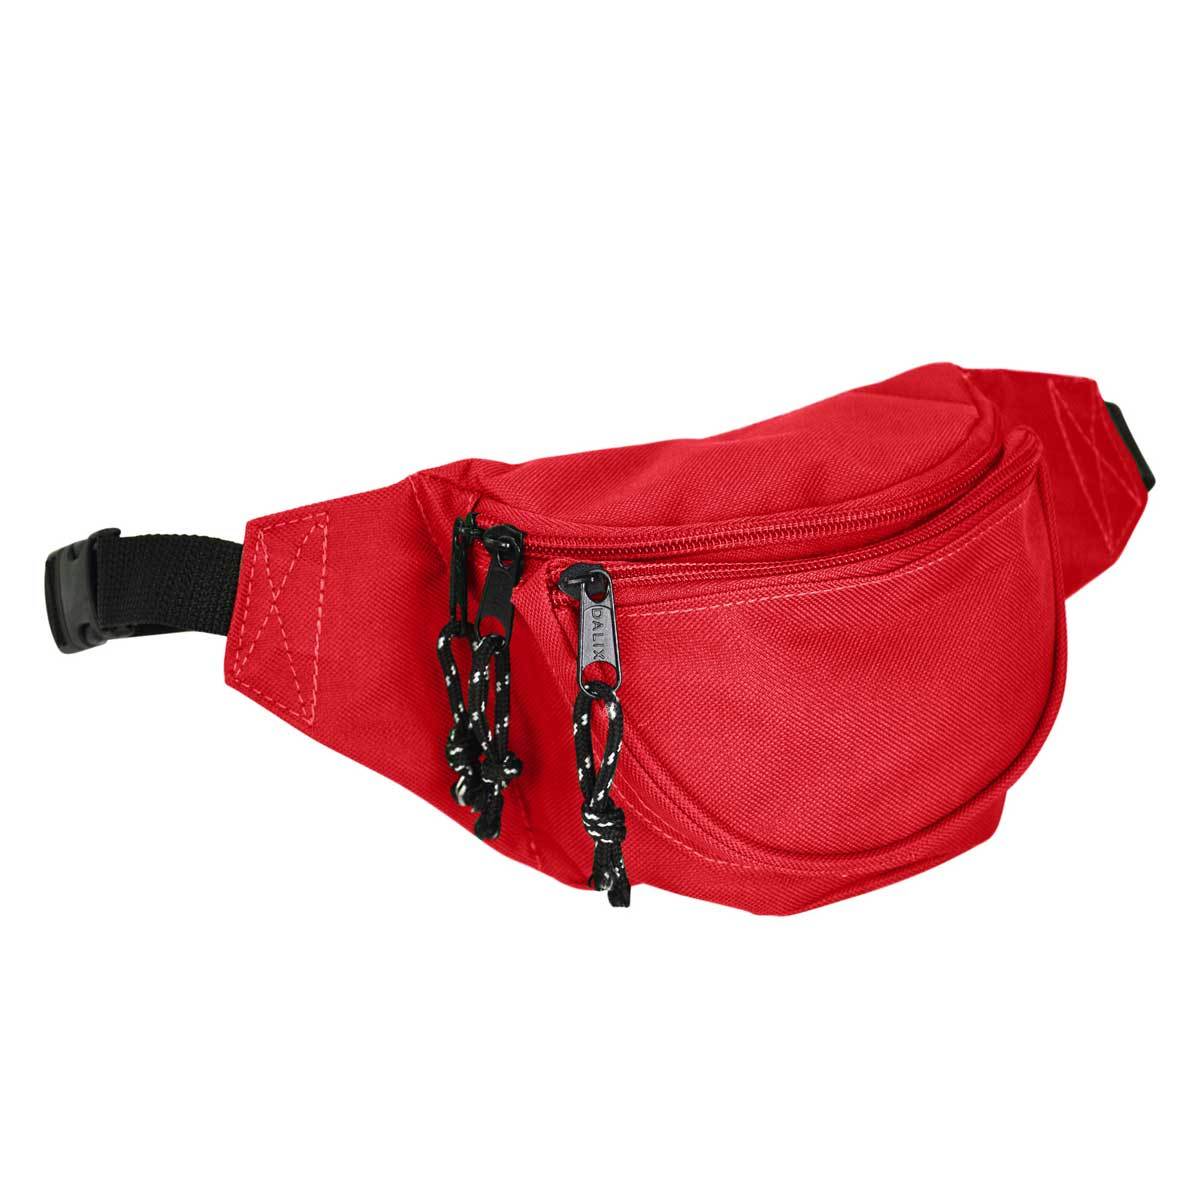 DALIX Fanny Pack w/ 3 Pockets Traveling Concealment Pouch Airport Money Bag FP-001 Fanny Packs DALIX Red 